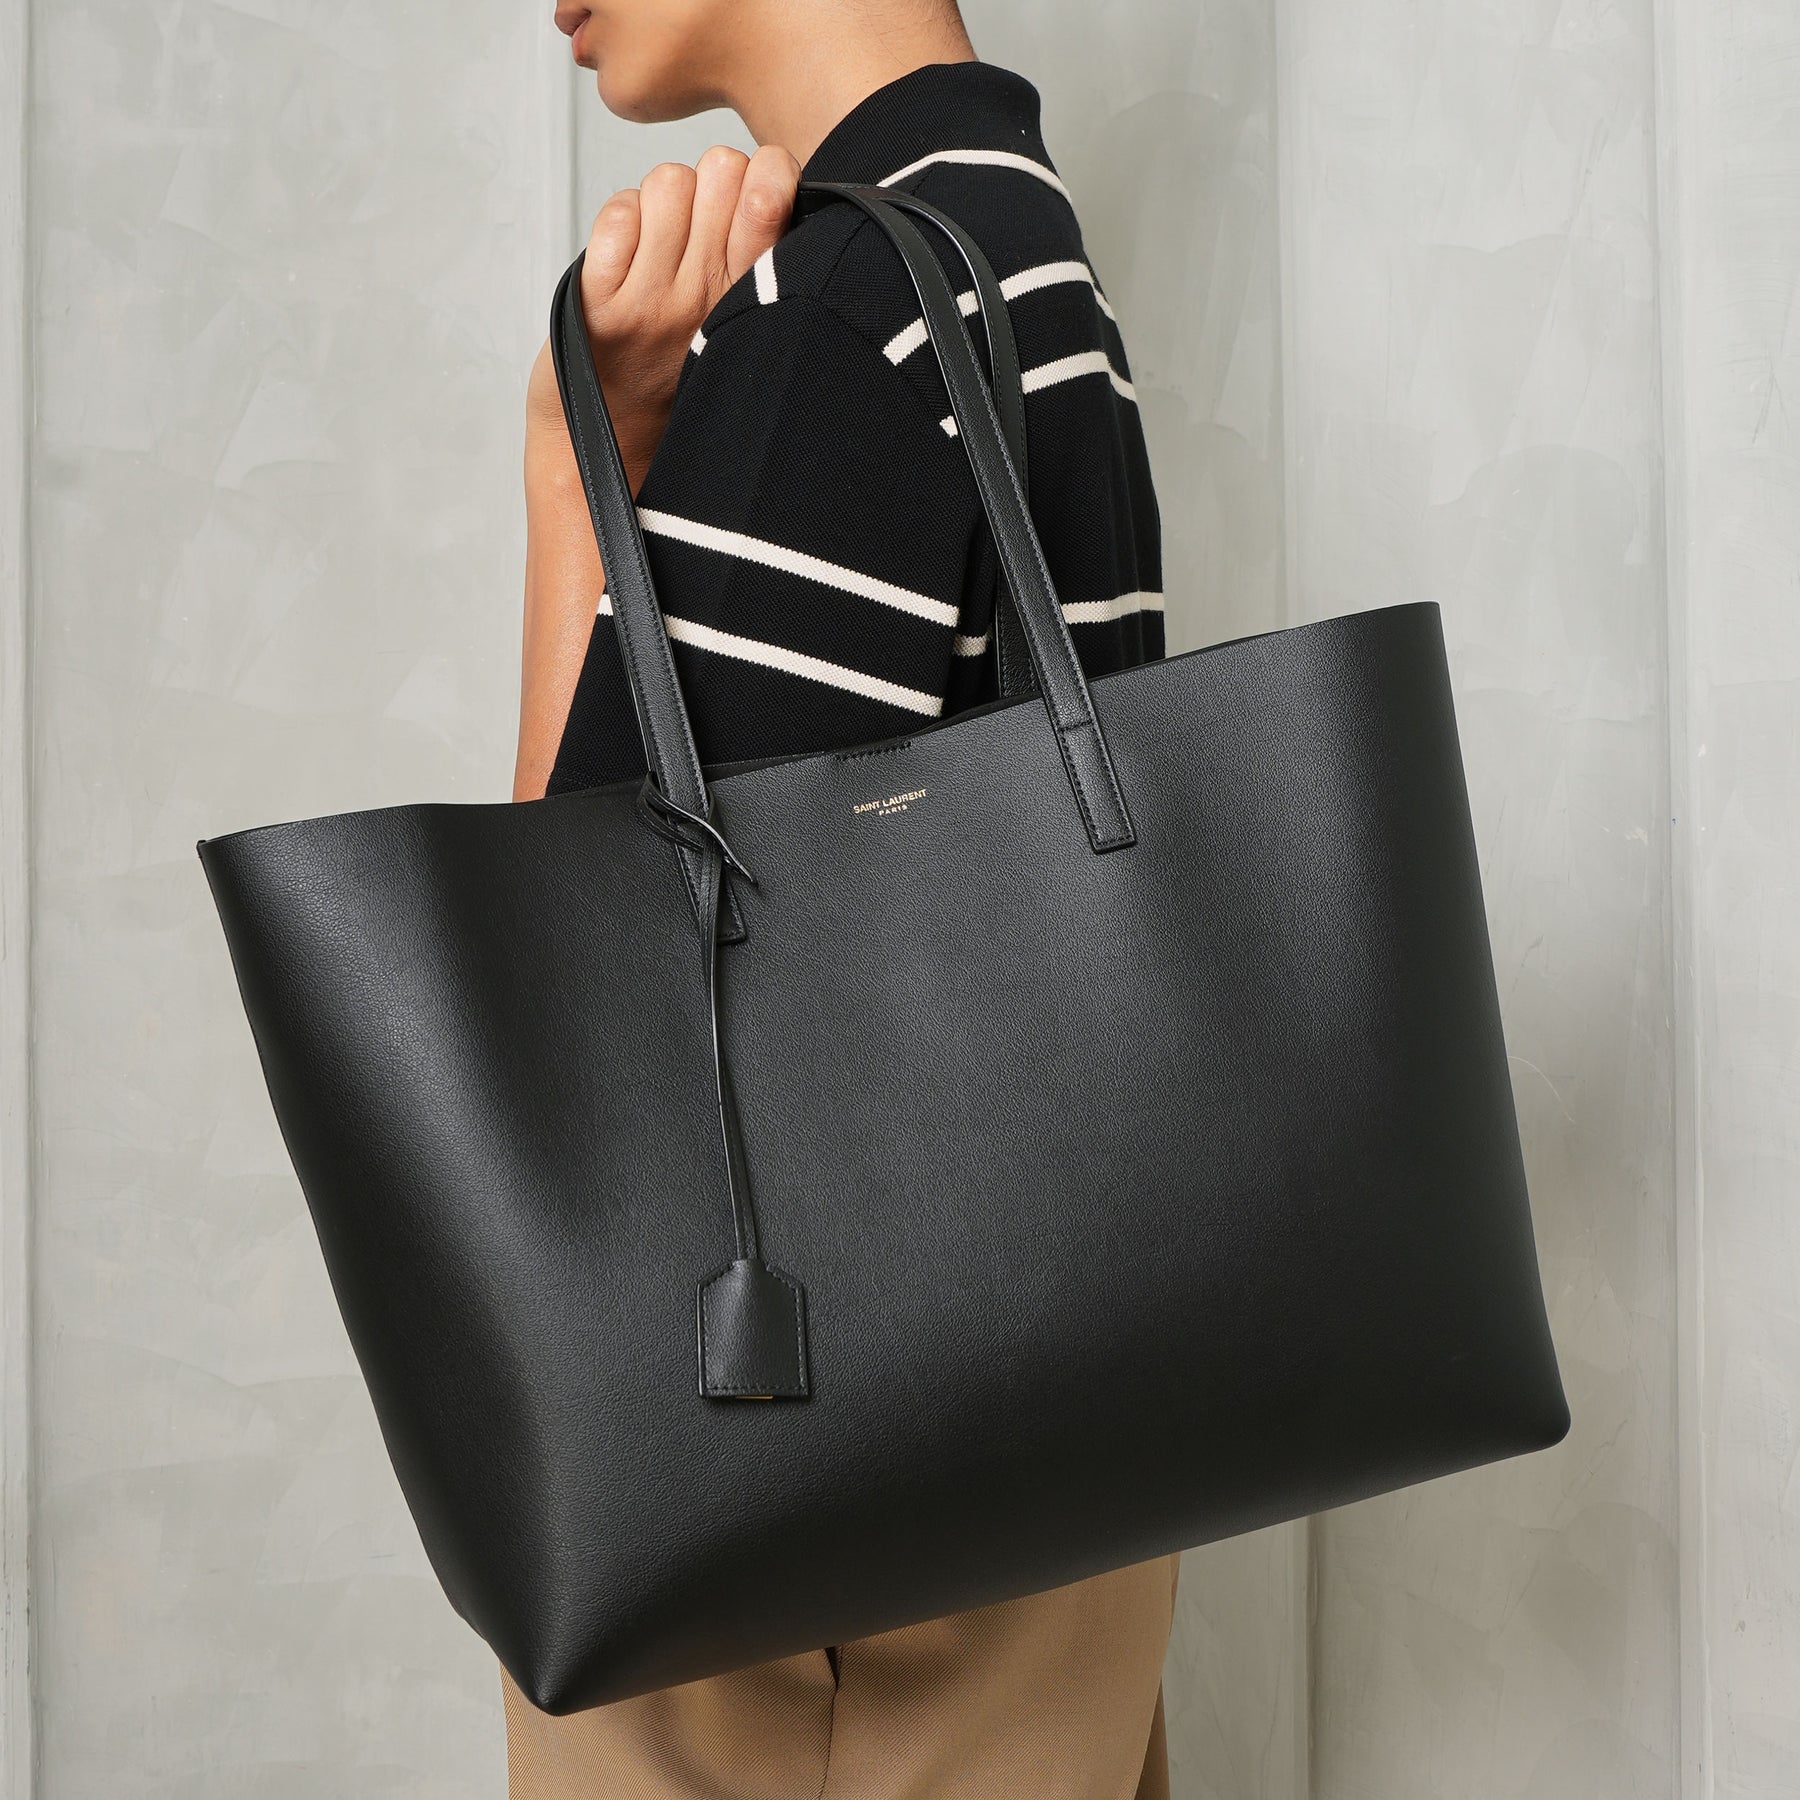 L&M Workbag — Sustainable Luxury Workbags for Women